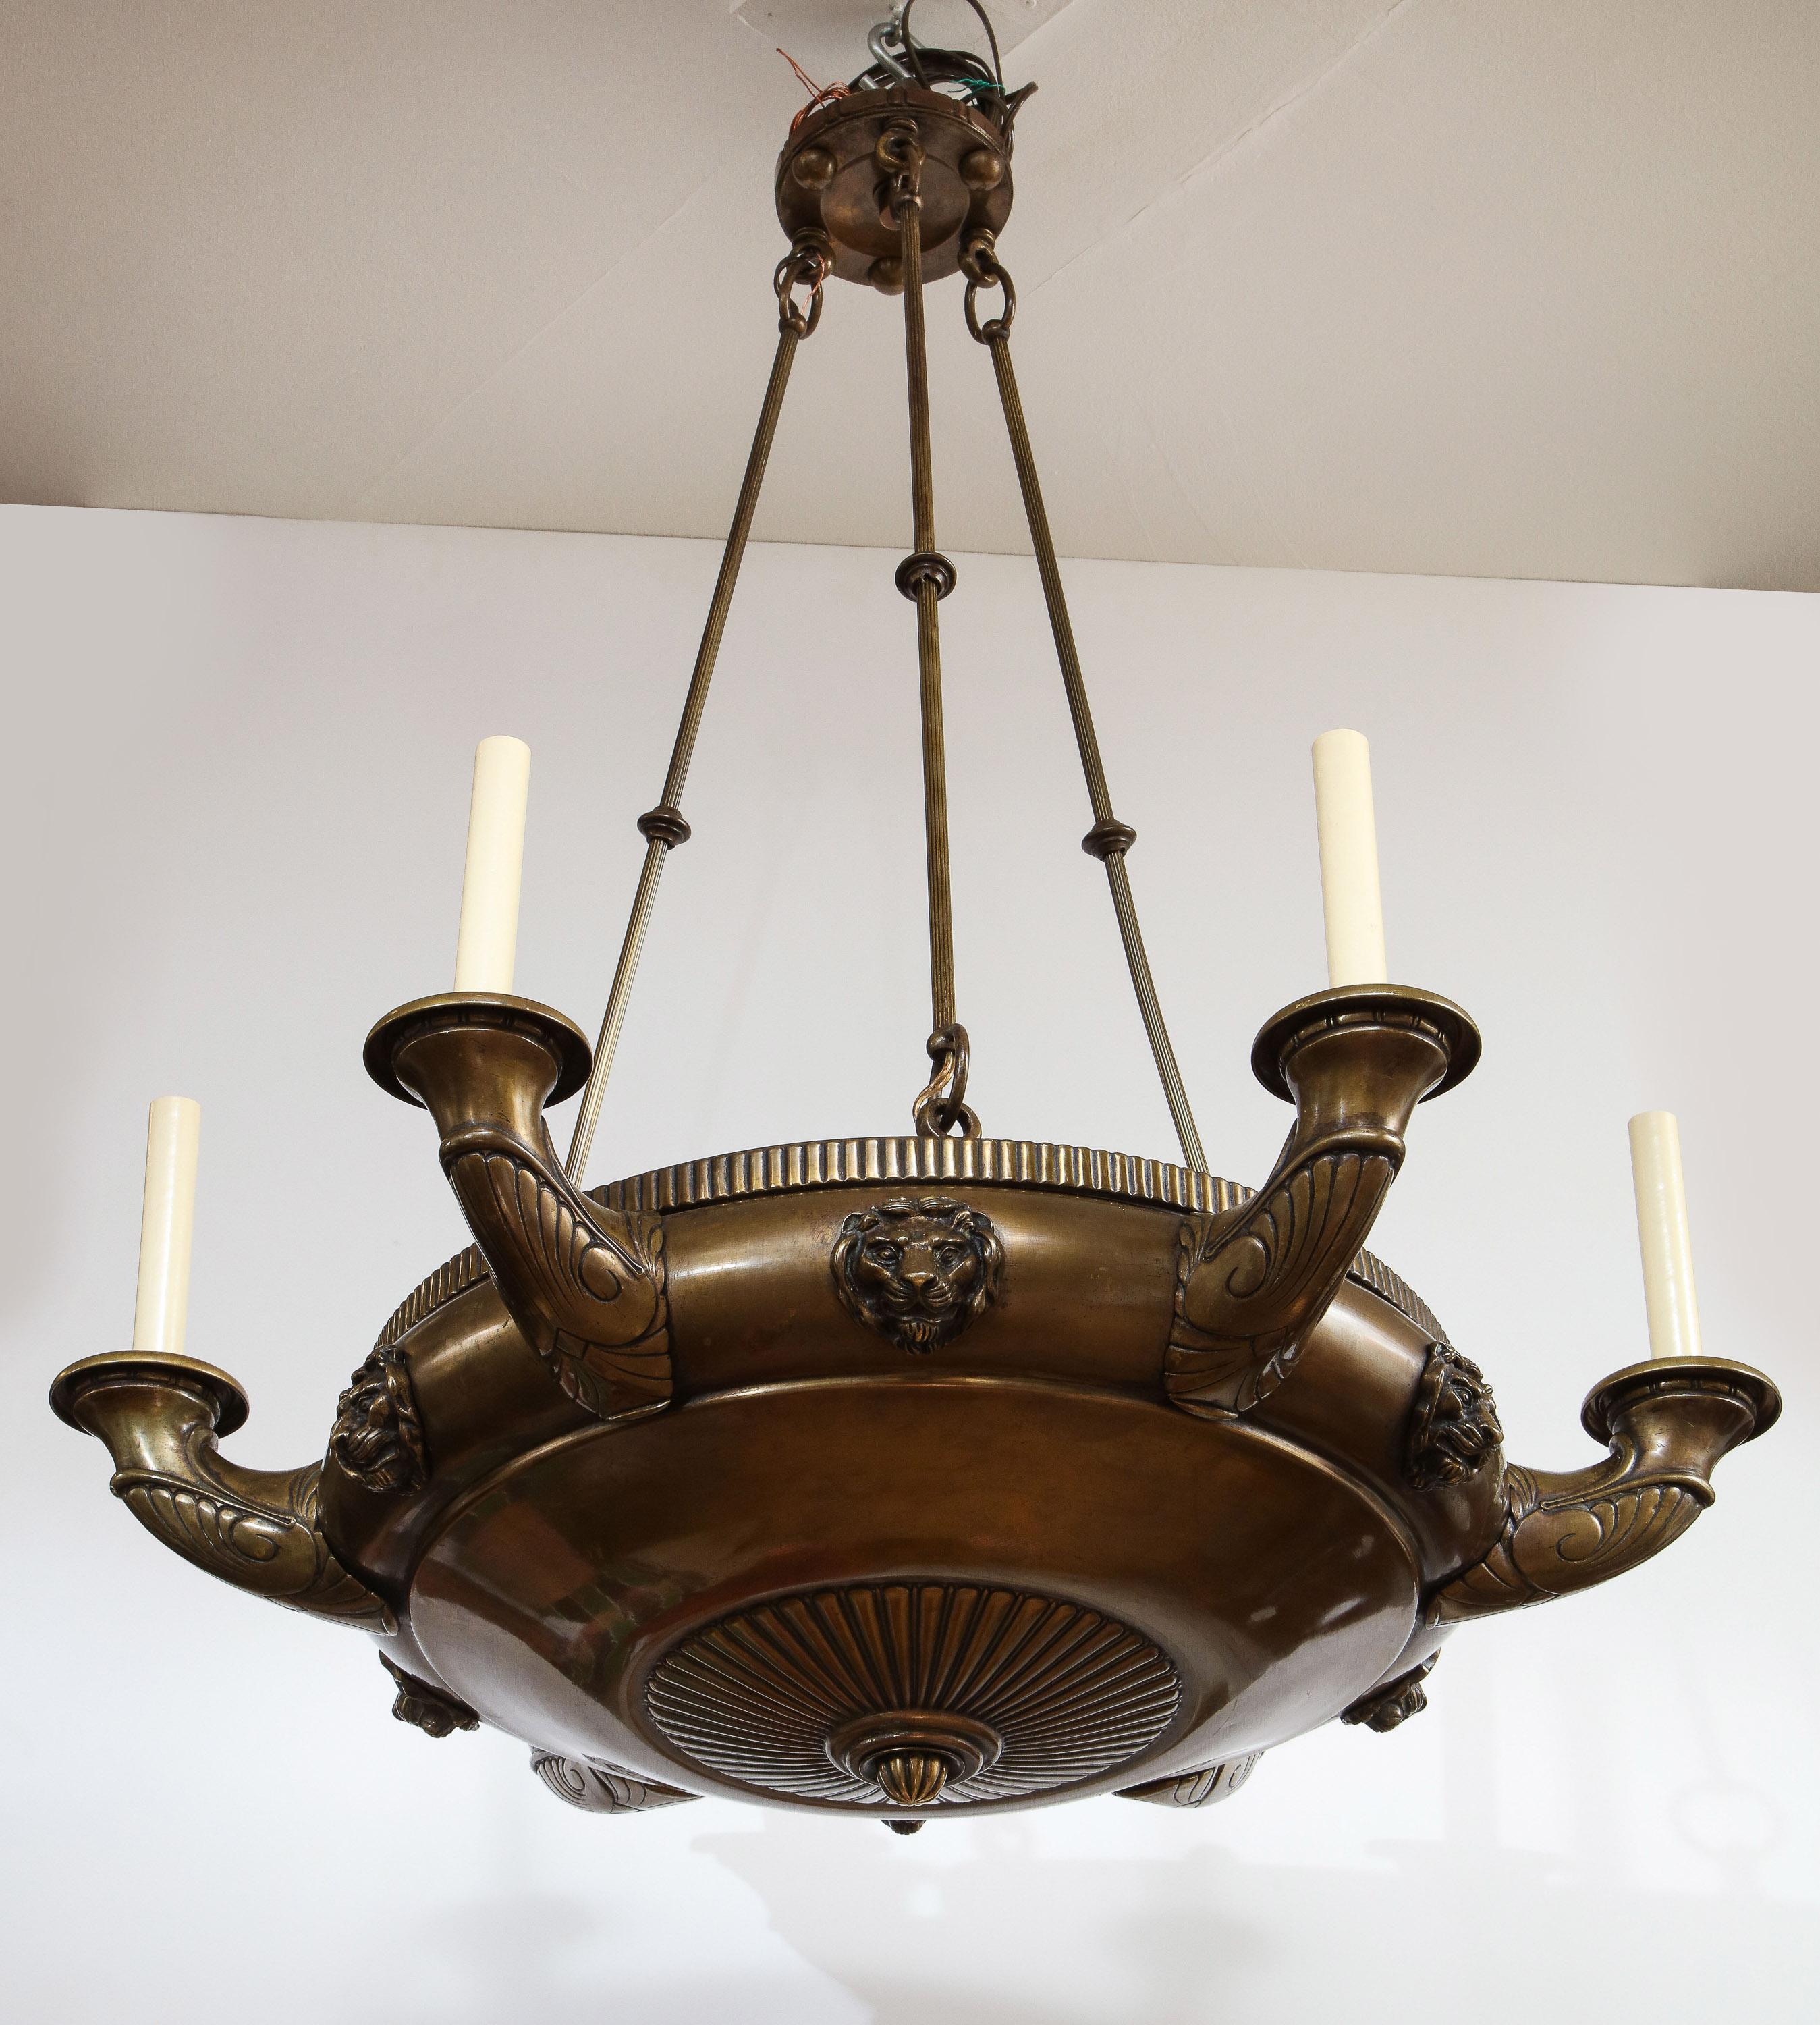 Fine 19th century bronze Empire style six light chandelier, now electrified, having lion mask mounts, palmette decorated arms and ribbed basin, suspended from three bronze rods with ring turned collars, the whole with rich patina.